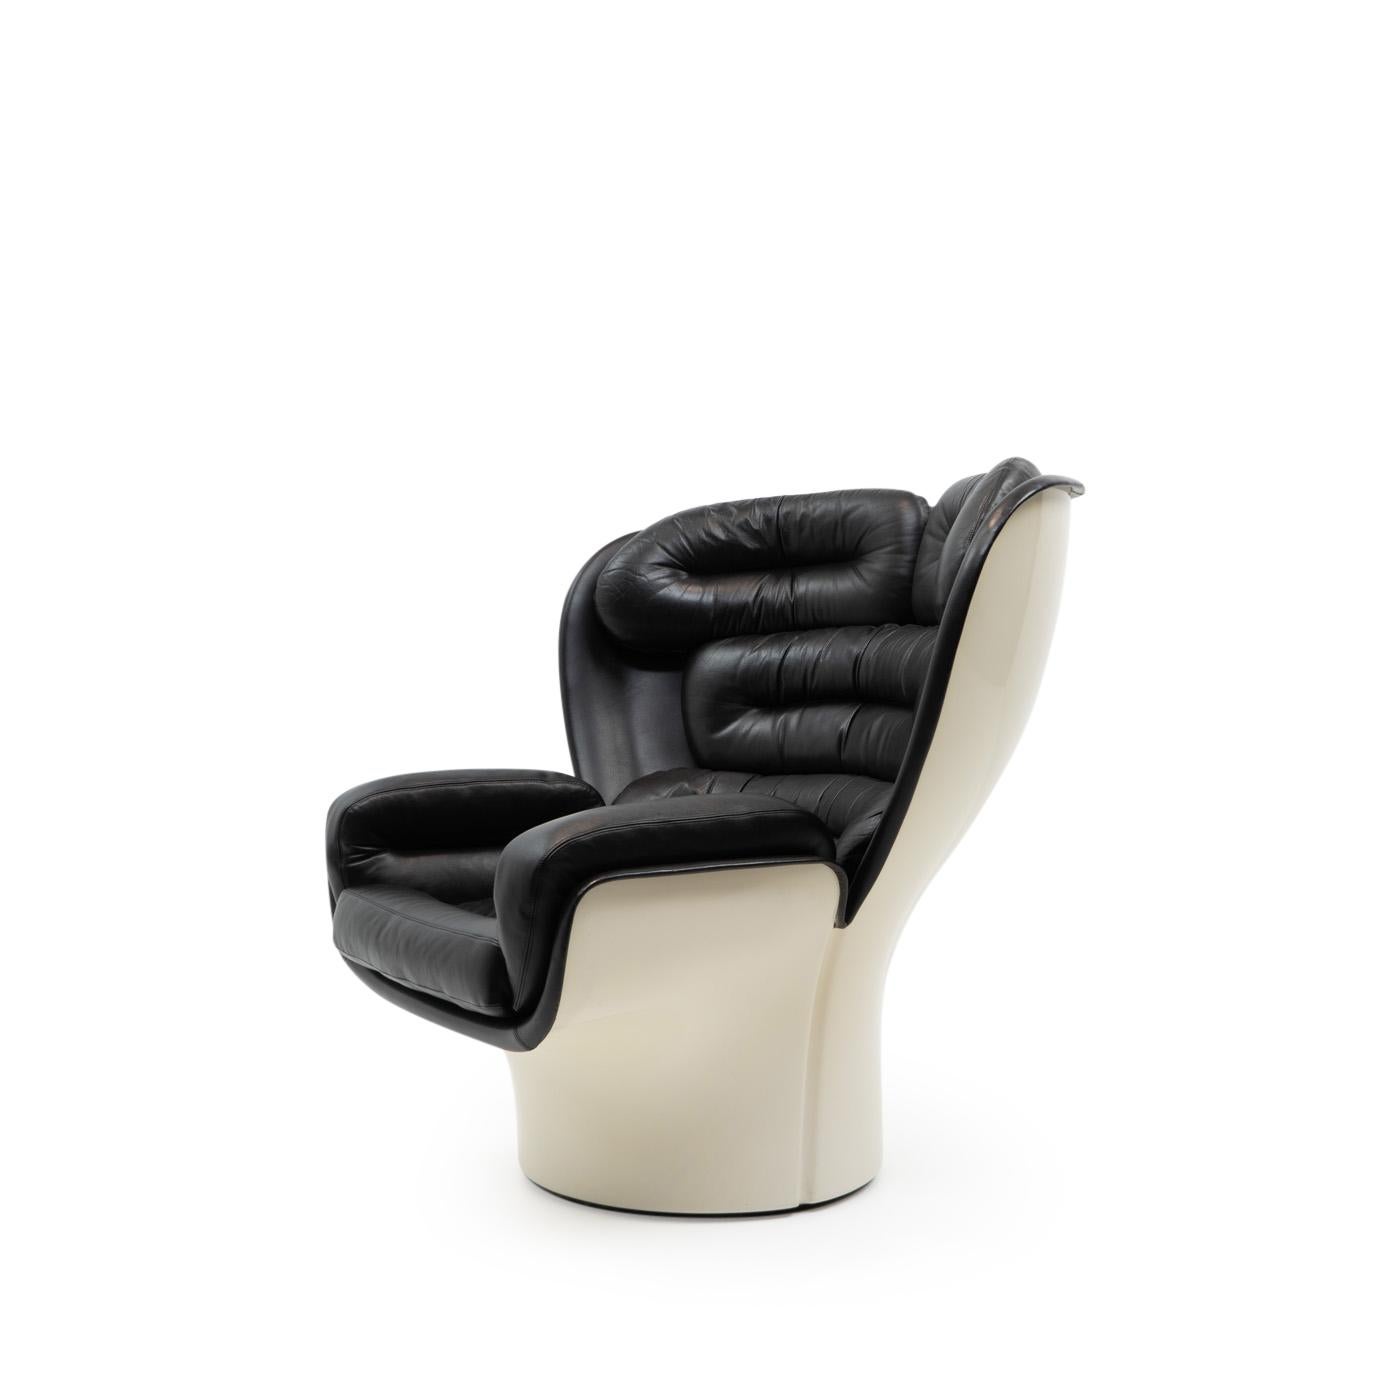 Italian Design Classic Elda Lounge Chair by Joe Colombo, 1970s Italy In Good Condition For Sale In Renens, CH